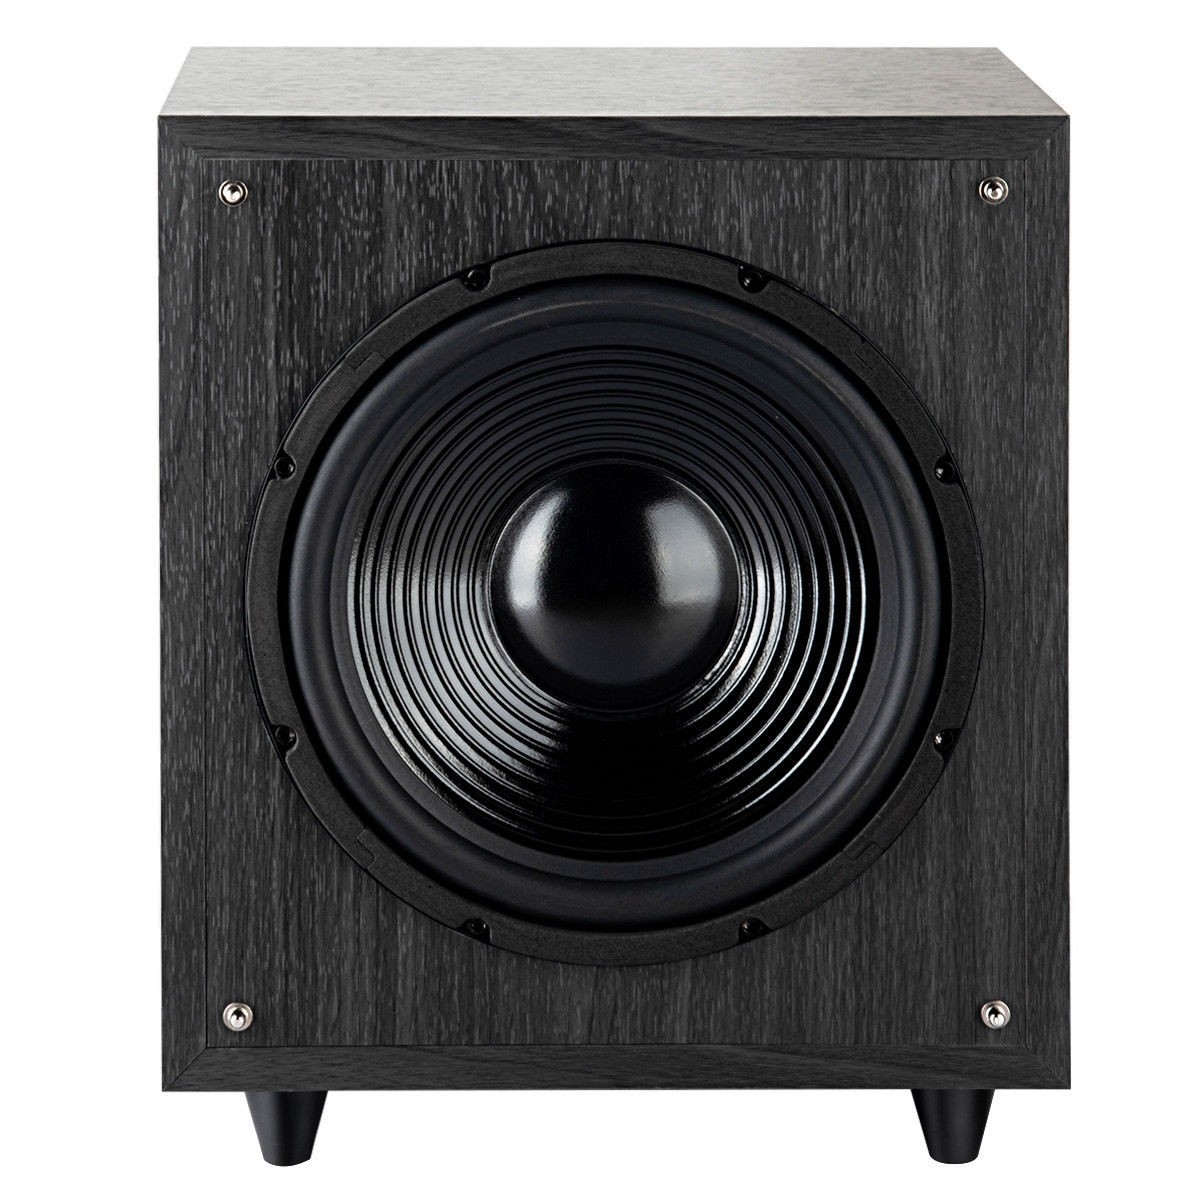 10 In. 400W Powered Active Subwoofer With Front - Firing Woofer